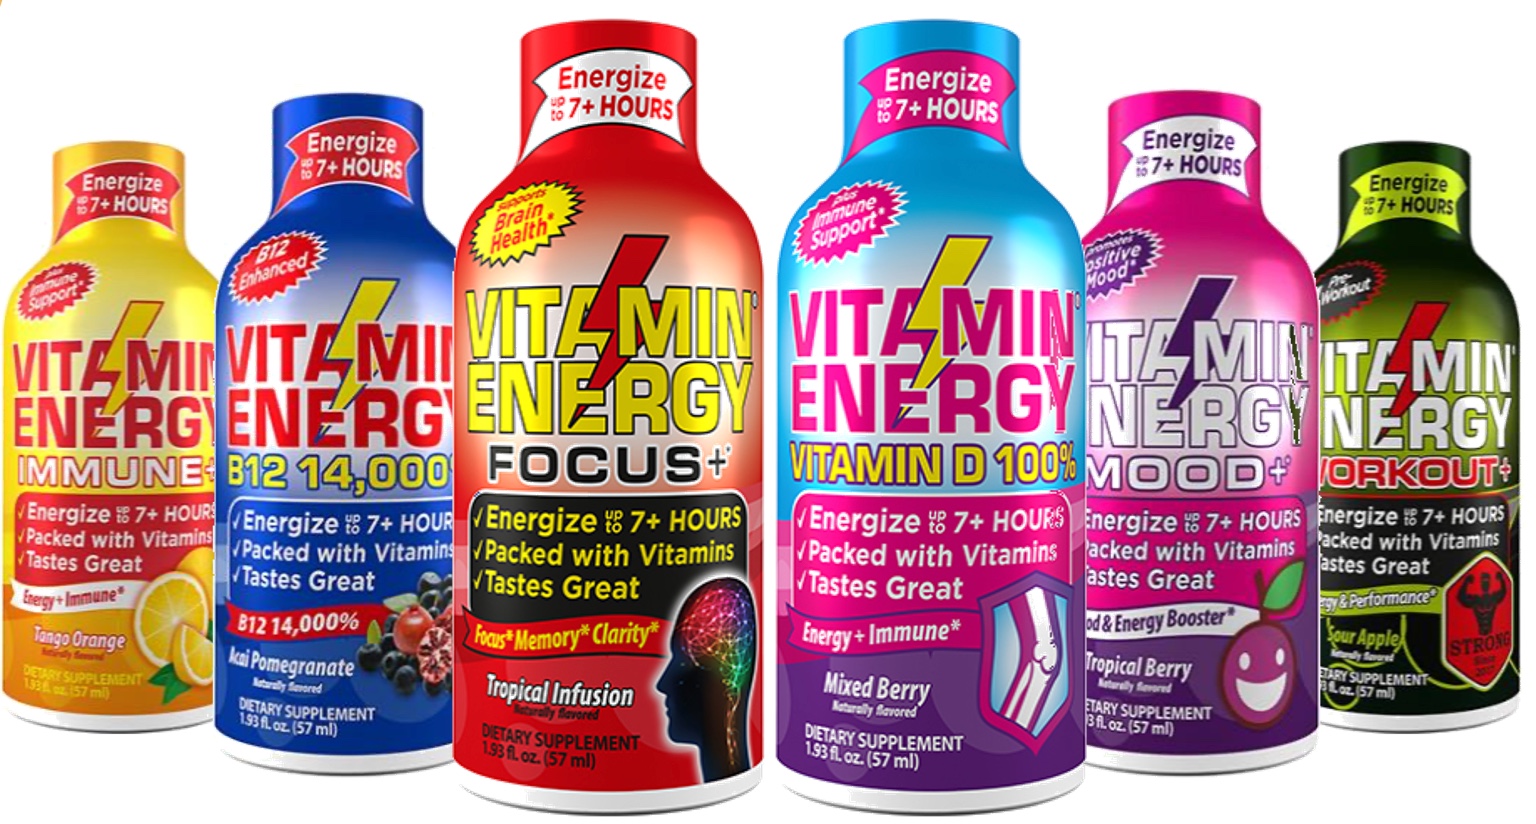 Vitamin Energy, LLC, Monday, July 19, 2021, Press release picture